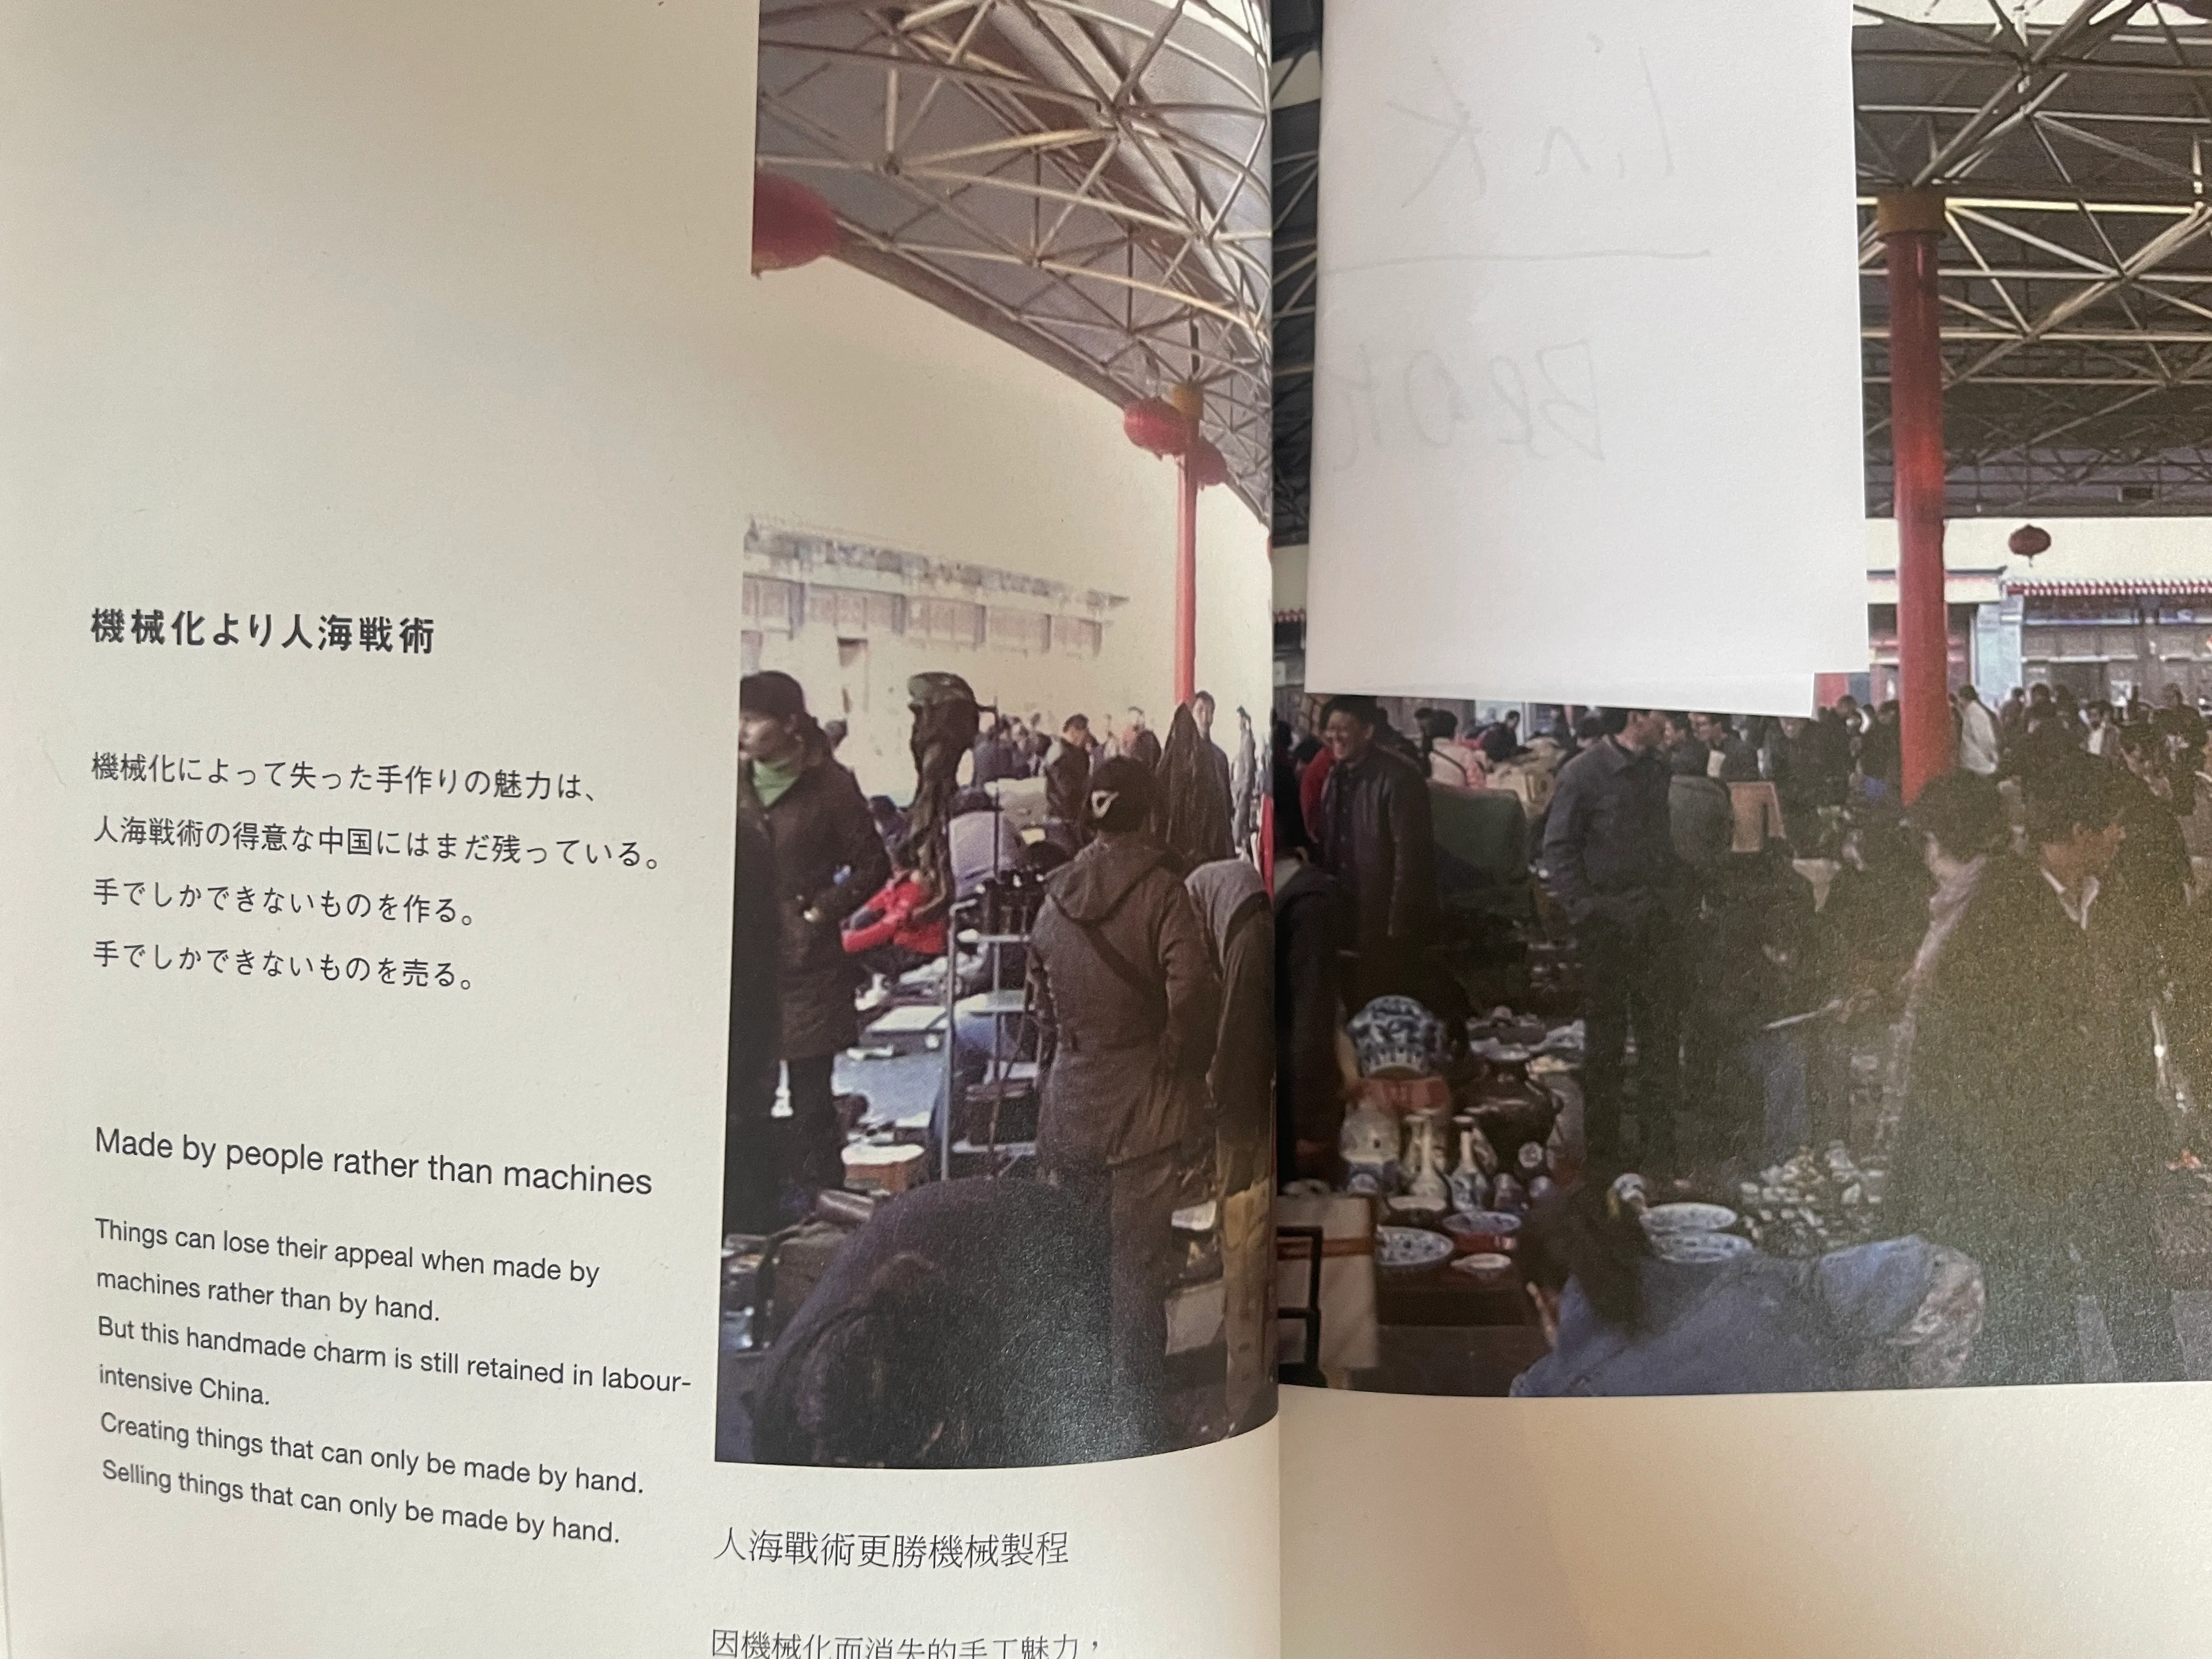 A photograph of favorite moment from Found Muji. Made by people rather than machines.